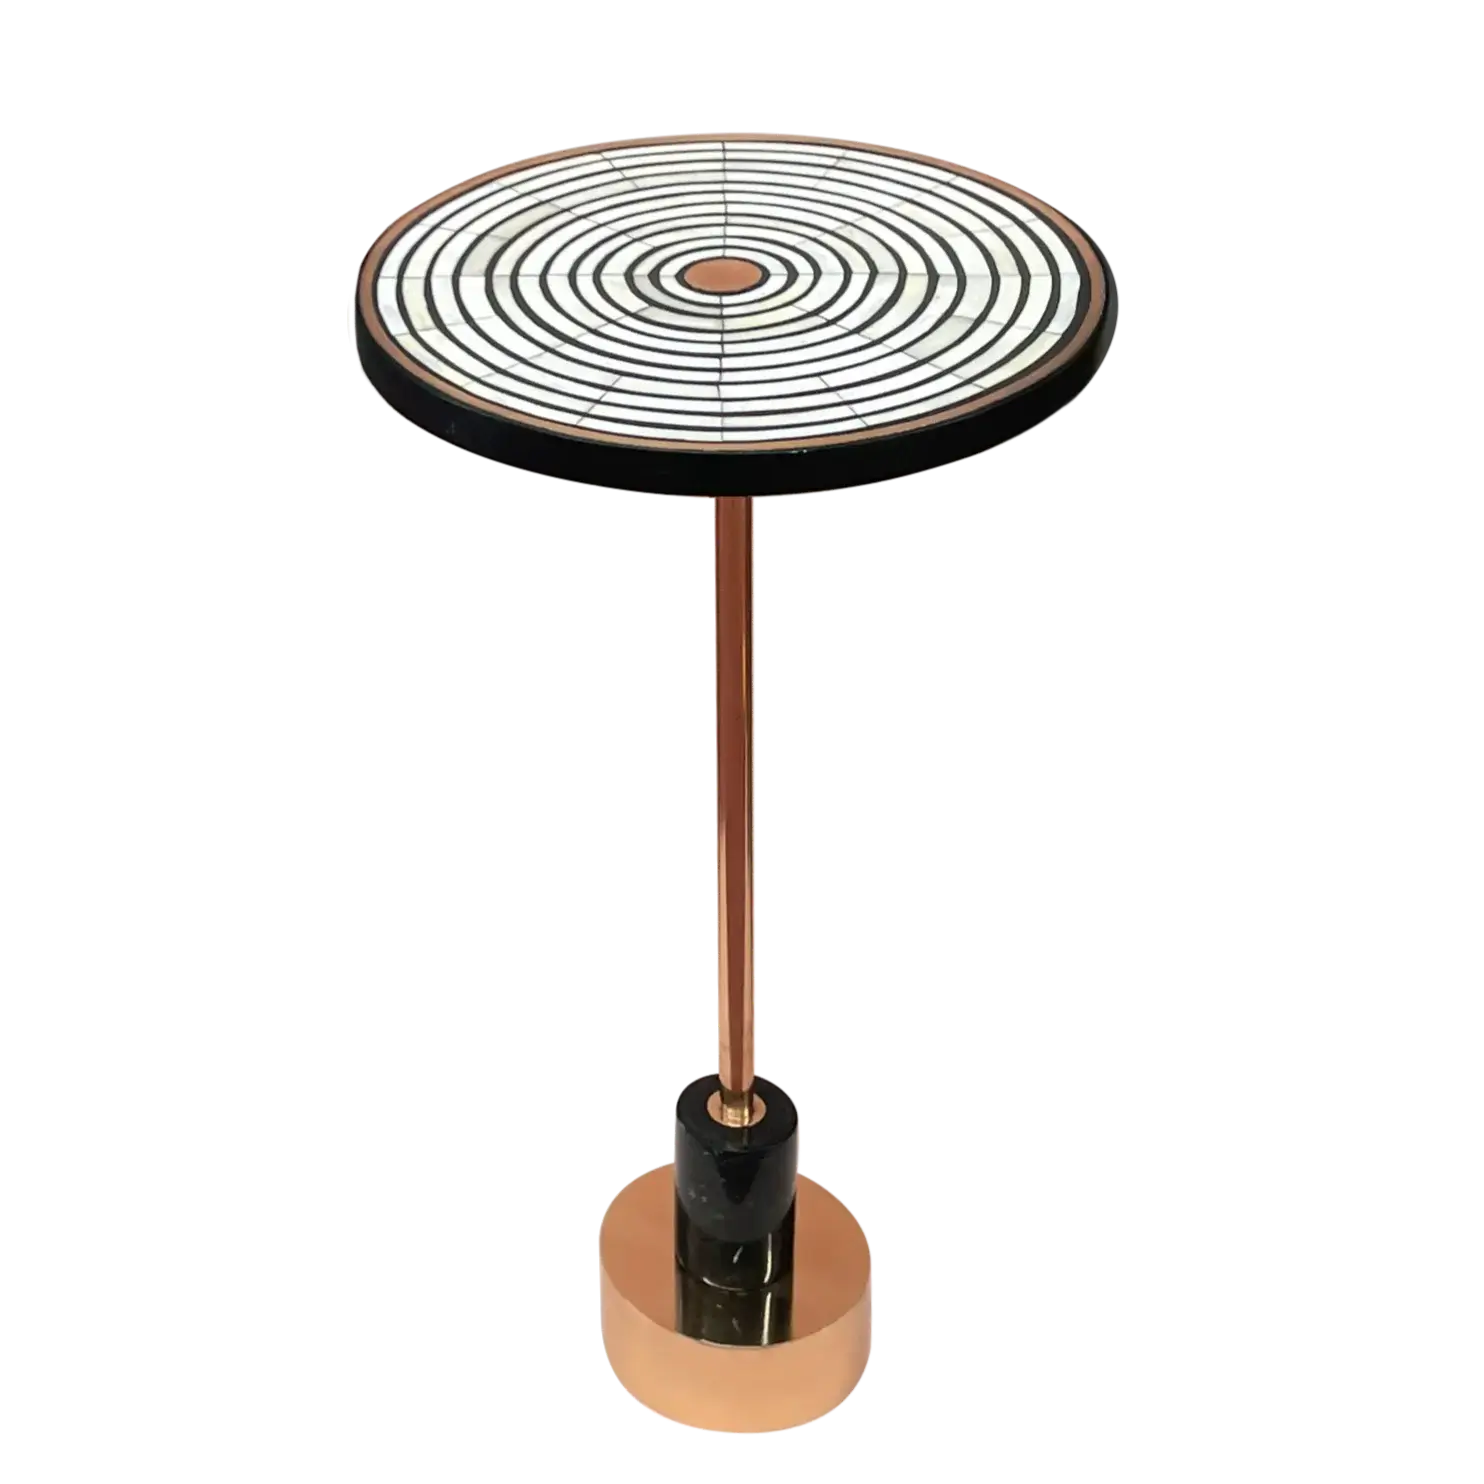 Dounia home Drink table in Polished copper made of brass and bone inlay, Model: LIla